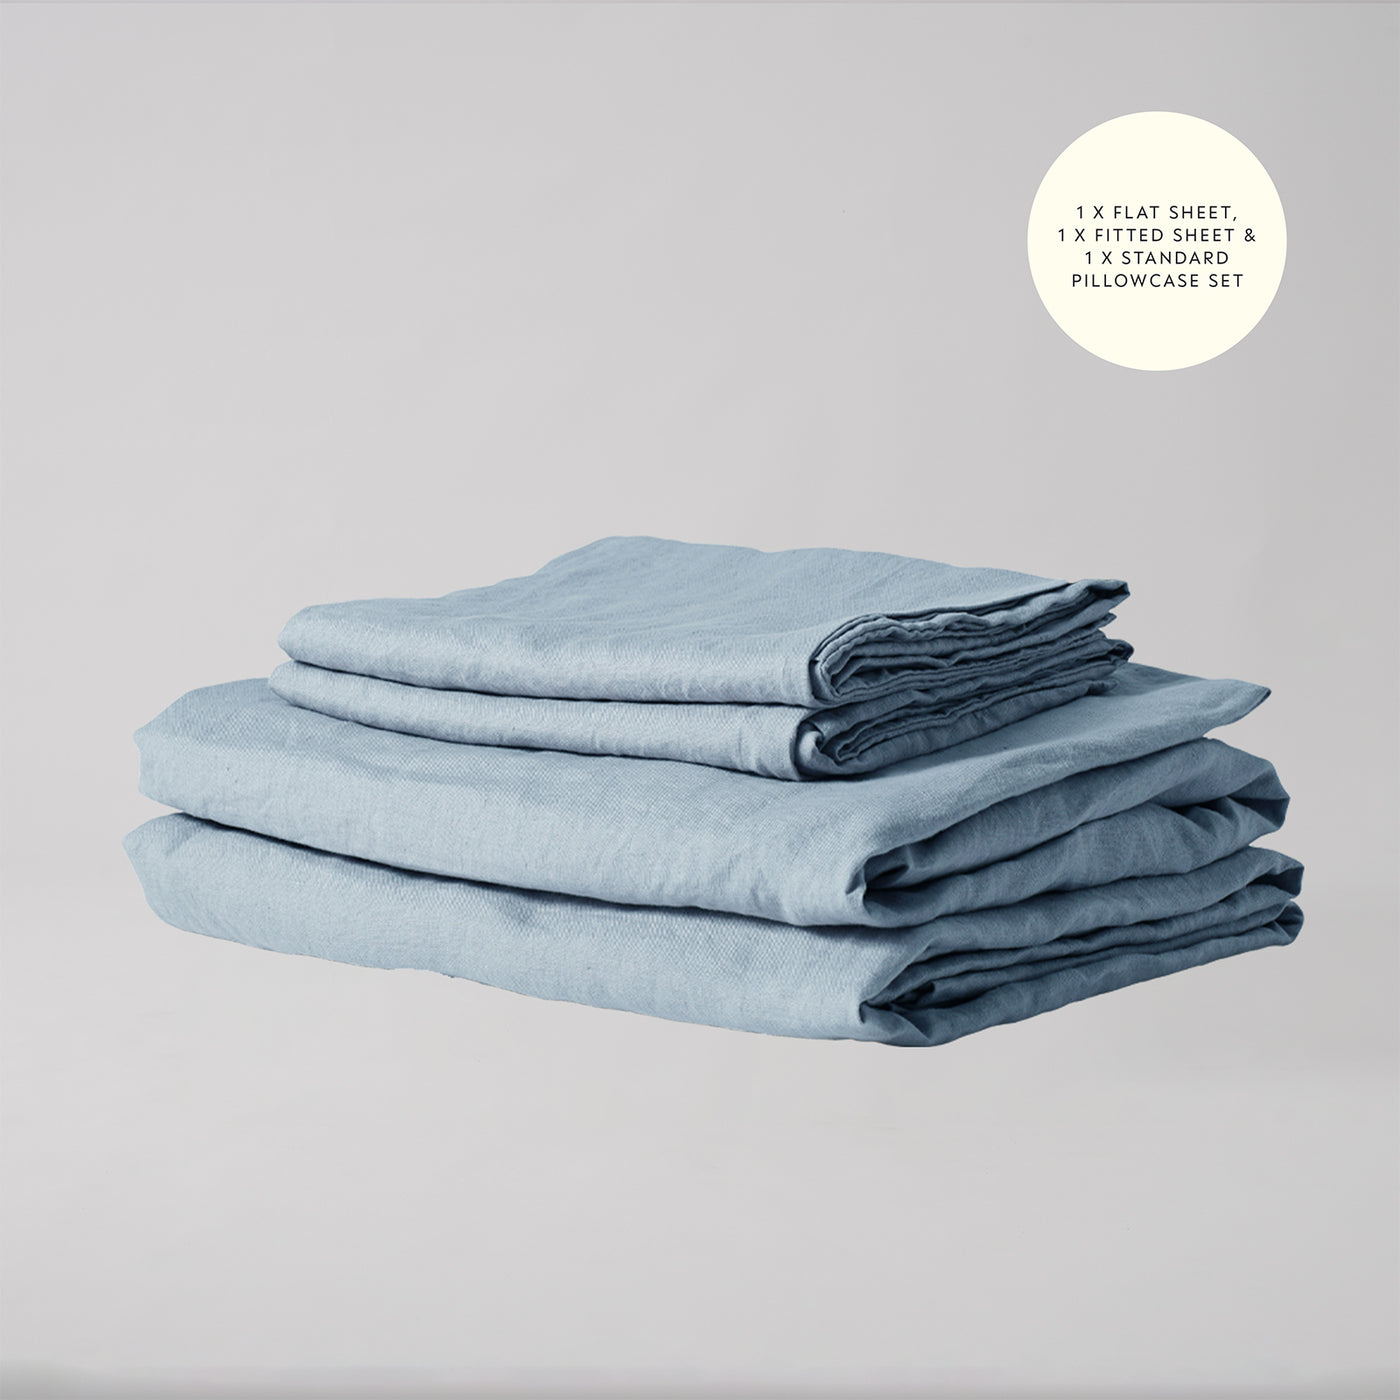 French Flax Linen Sheet Set in Marine Blue